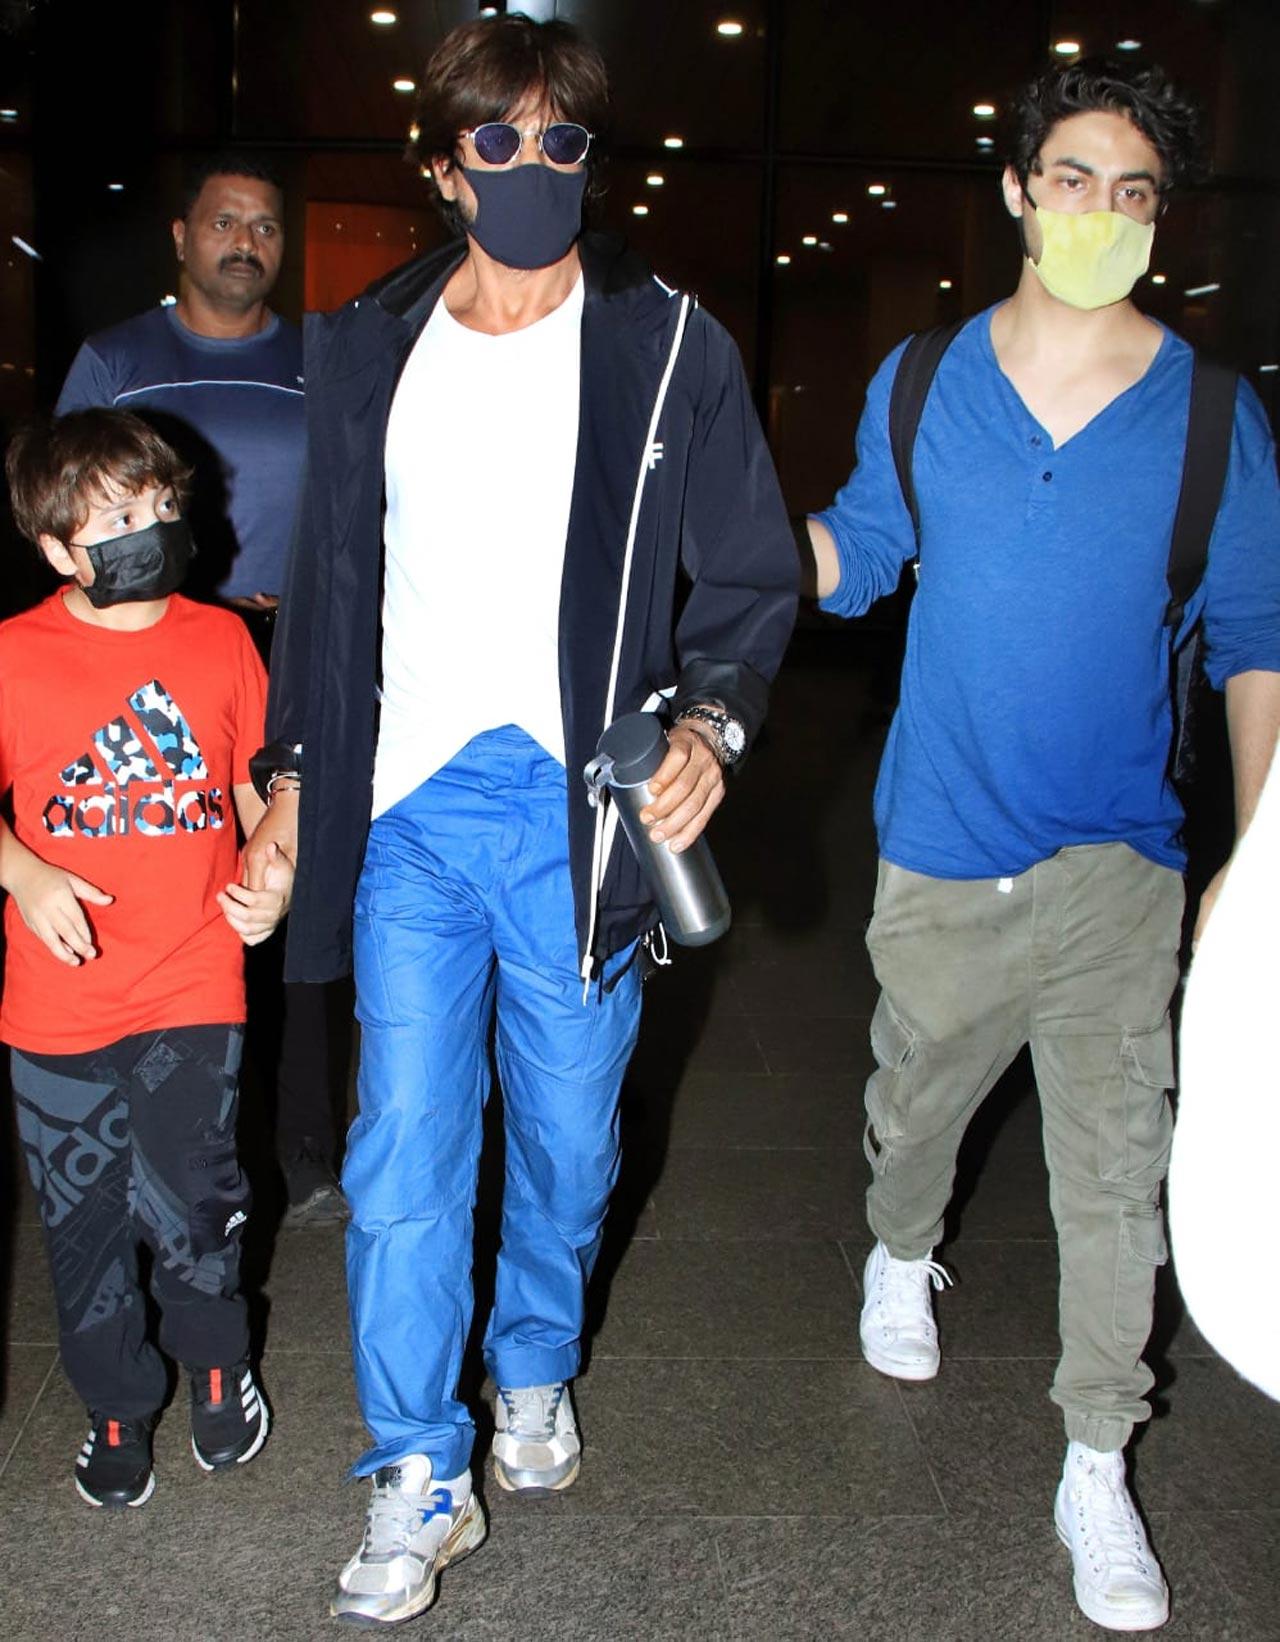 Shah Rukh Khan was snapped with his kids - AbRam Khan and Aryan Khan at their casual best. While the actor sported a black jacket, paired with a basic blue denim and a white t-shirt, Aryan was seen wearing uber-cool blue t-shirt